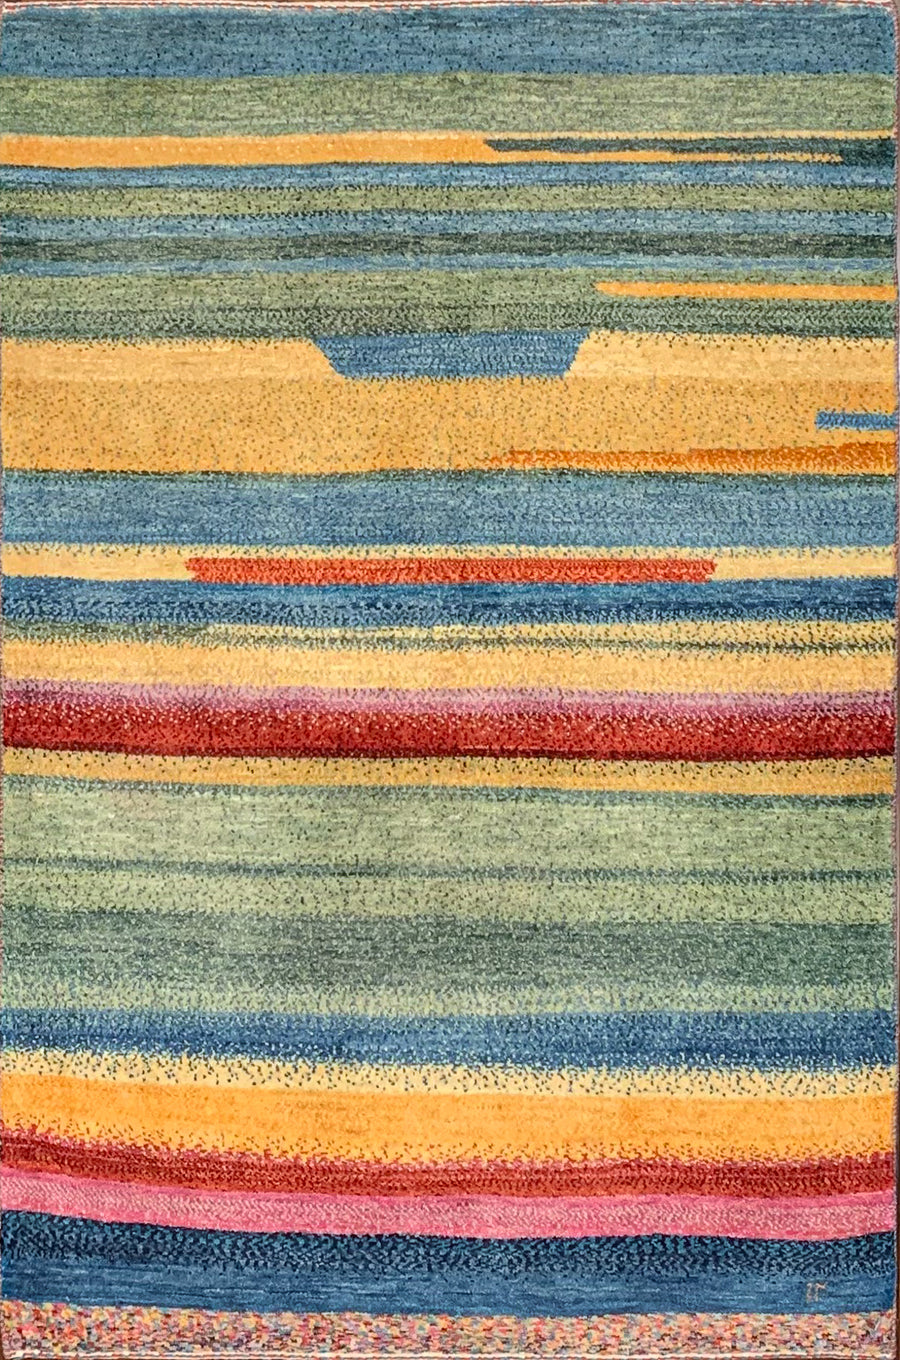 Bright and Vibrant 3x5 Gabbeh hand-knotted in Southern Iran.